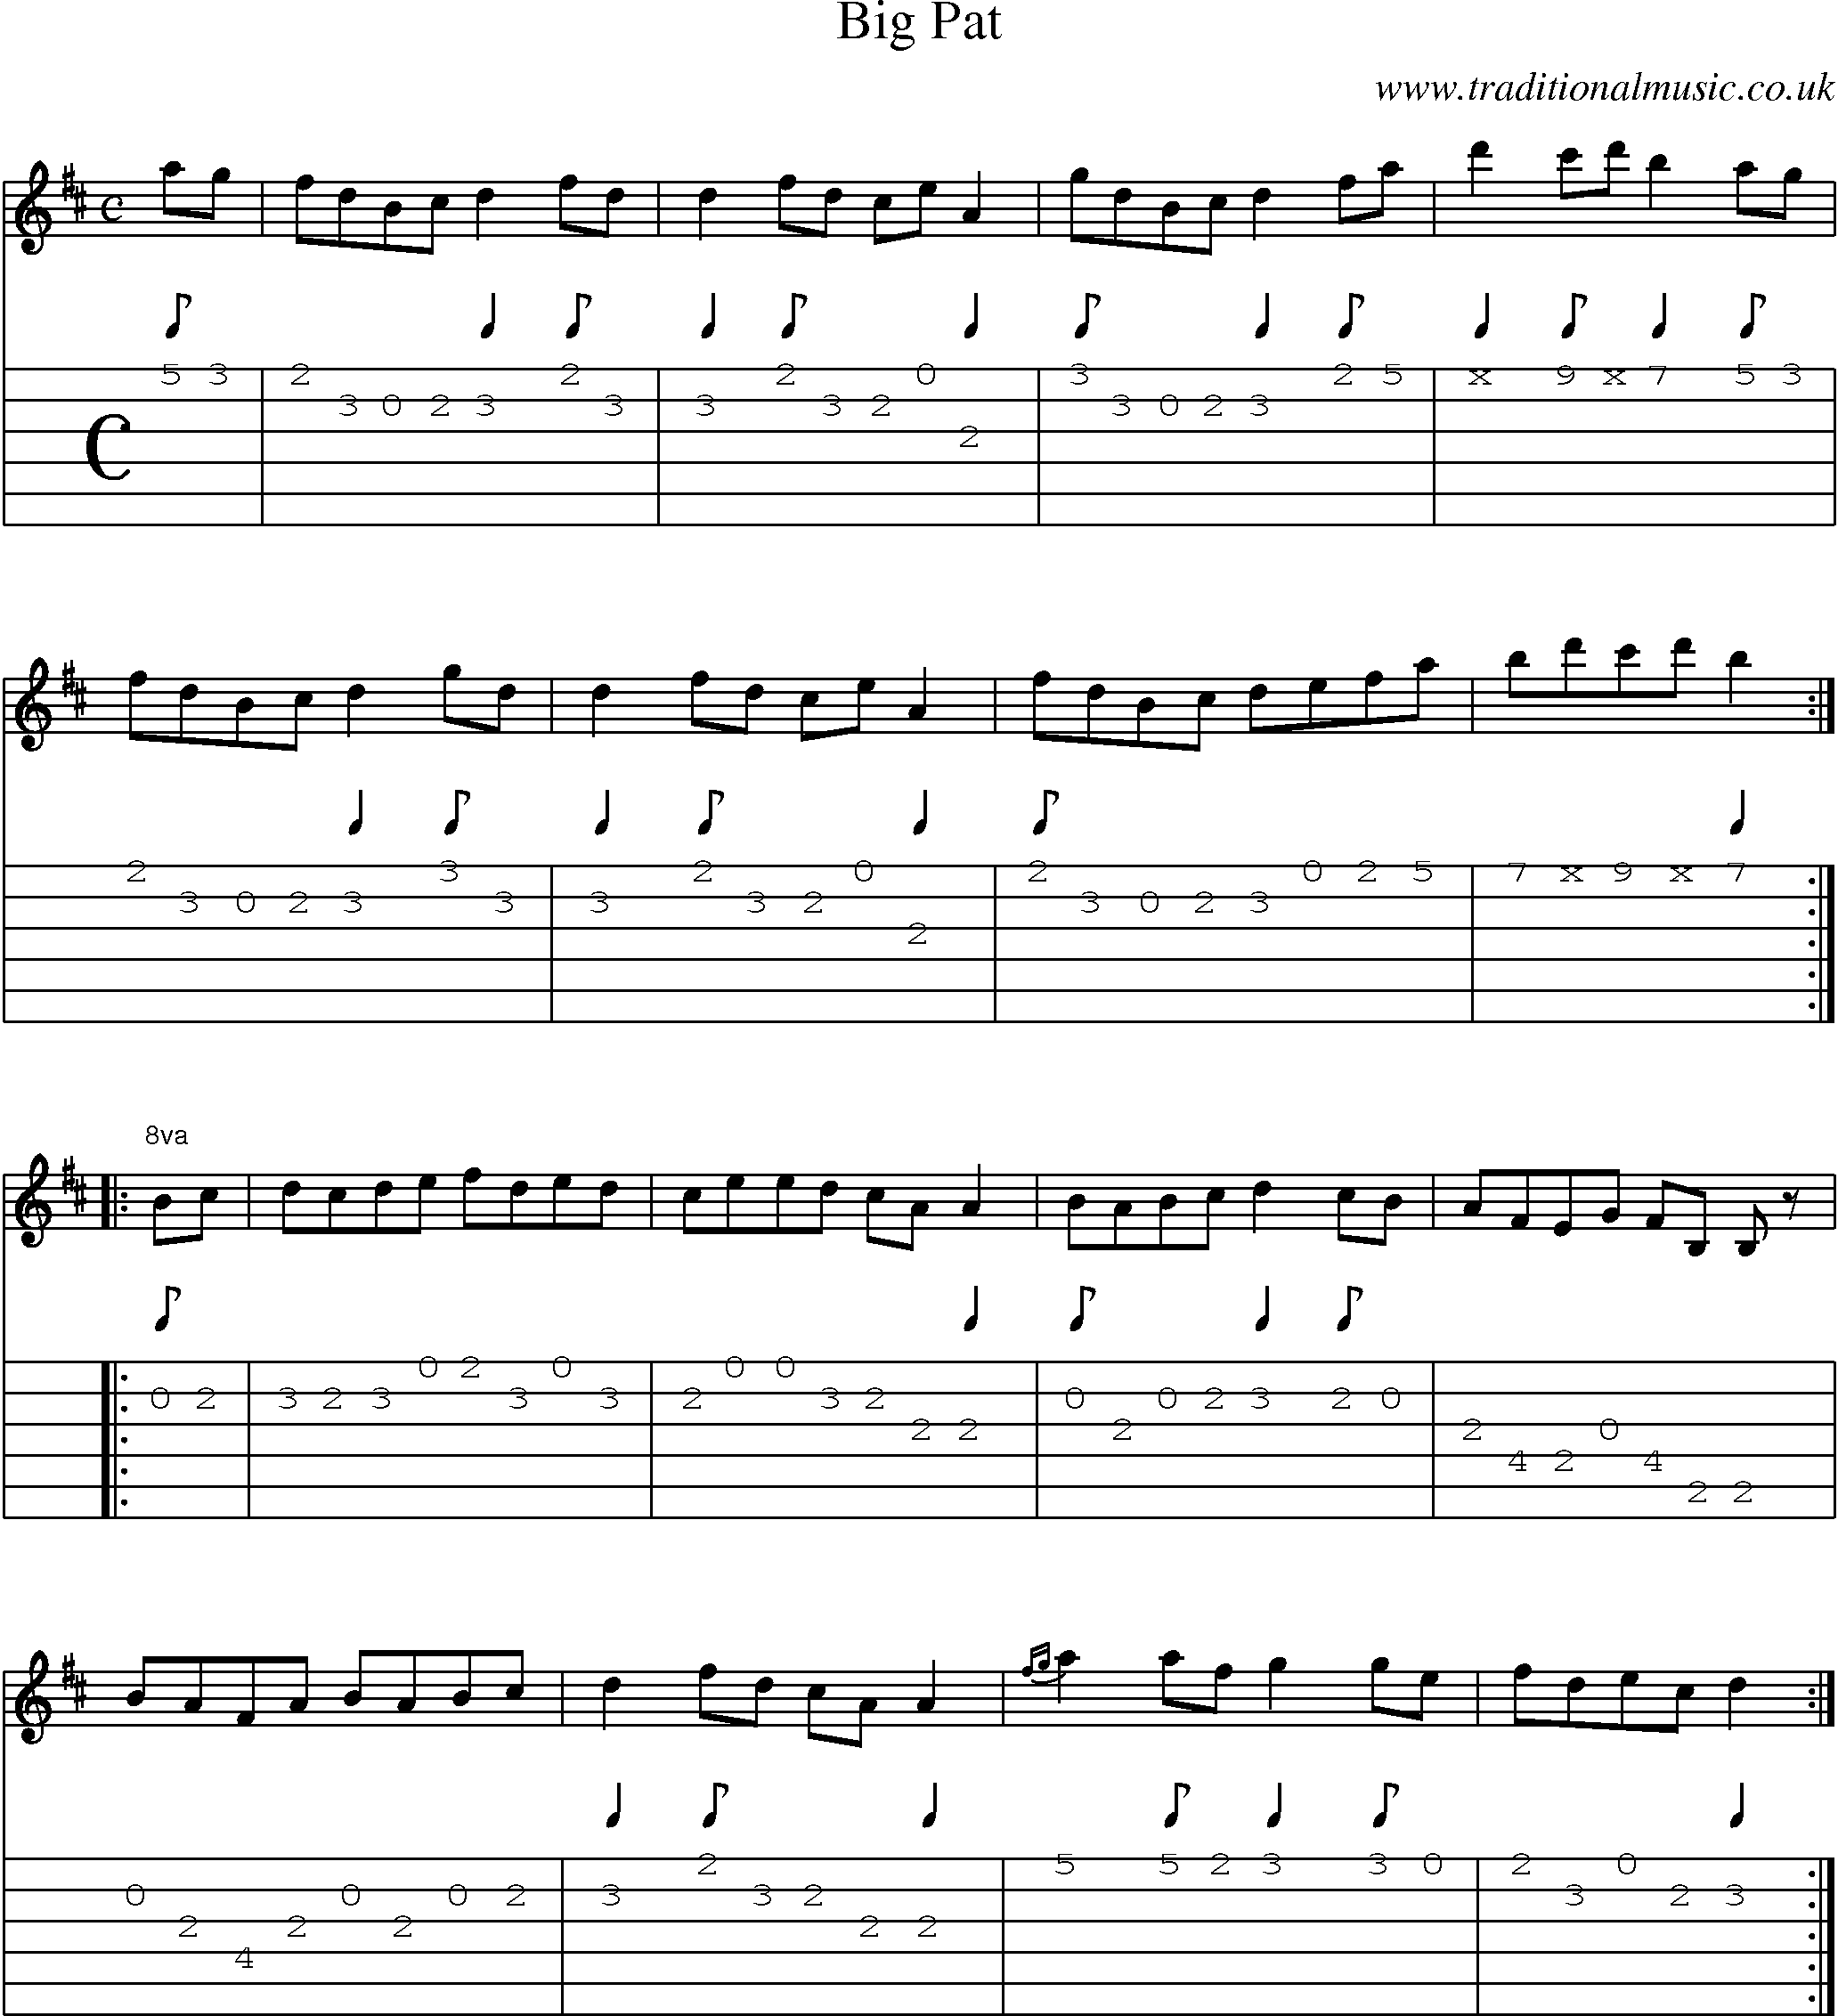 Music Score and Guitar Tabs for Big Pat